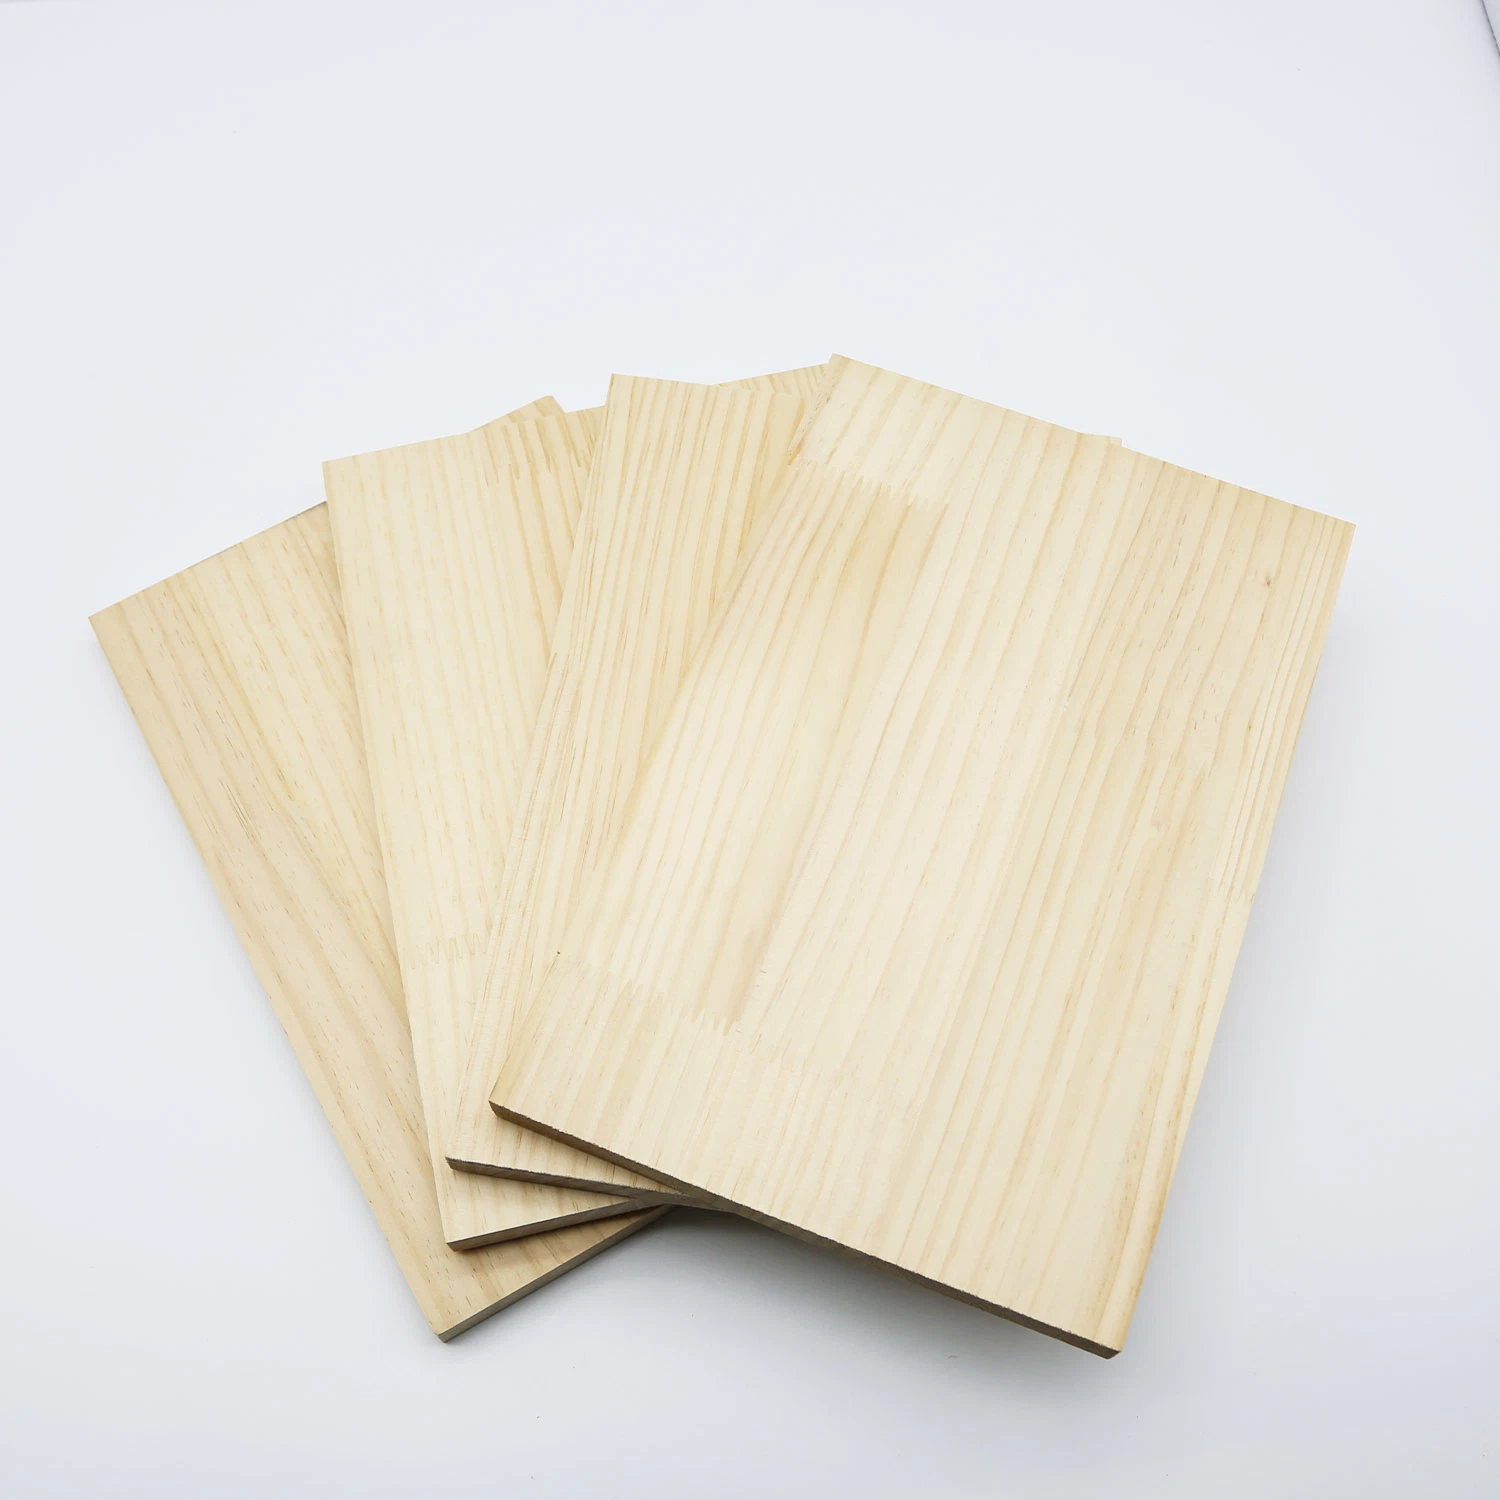 Top 4X8 FT AA Grade Rubberwood Finger Jointed Lamination Boards for Interior